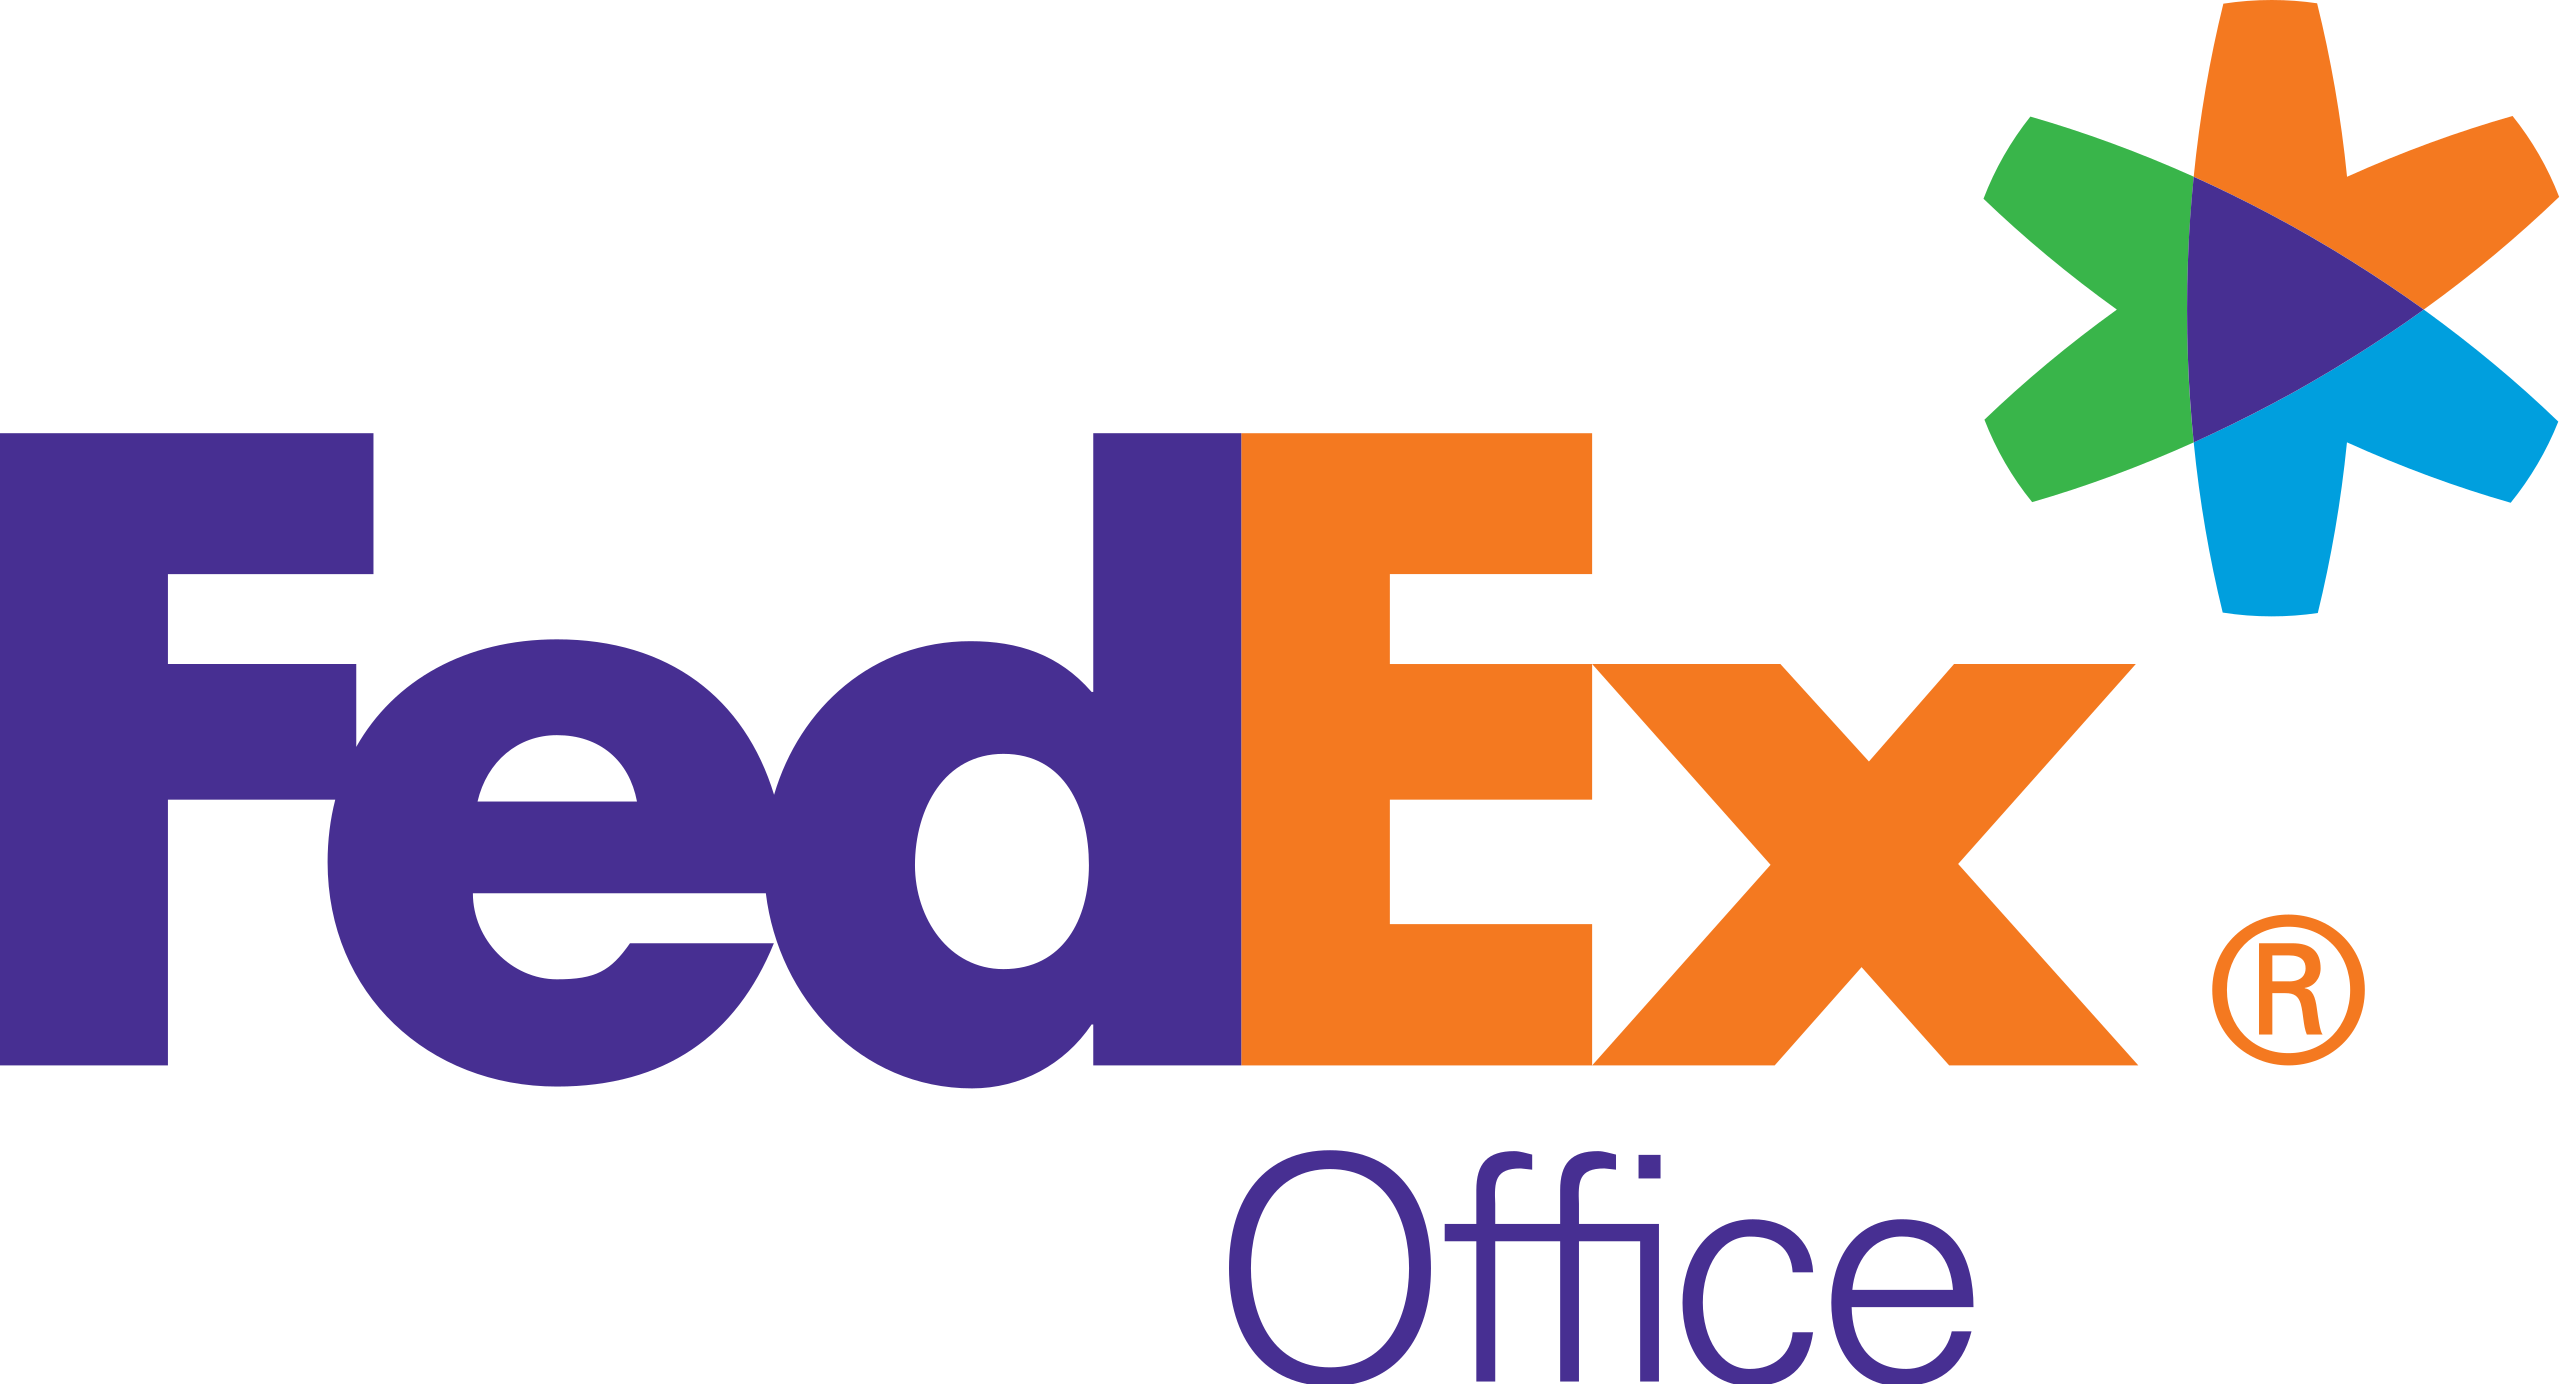 File:FedEx Office - 21 Logo.svg - Wikimedia Commons Within Fedex Brochure Template